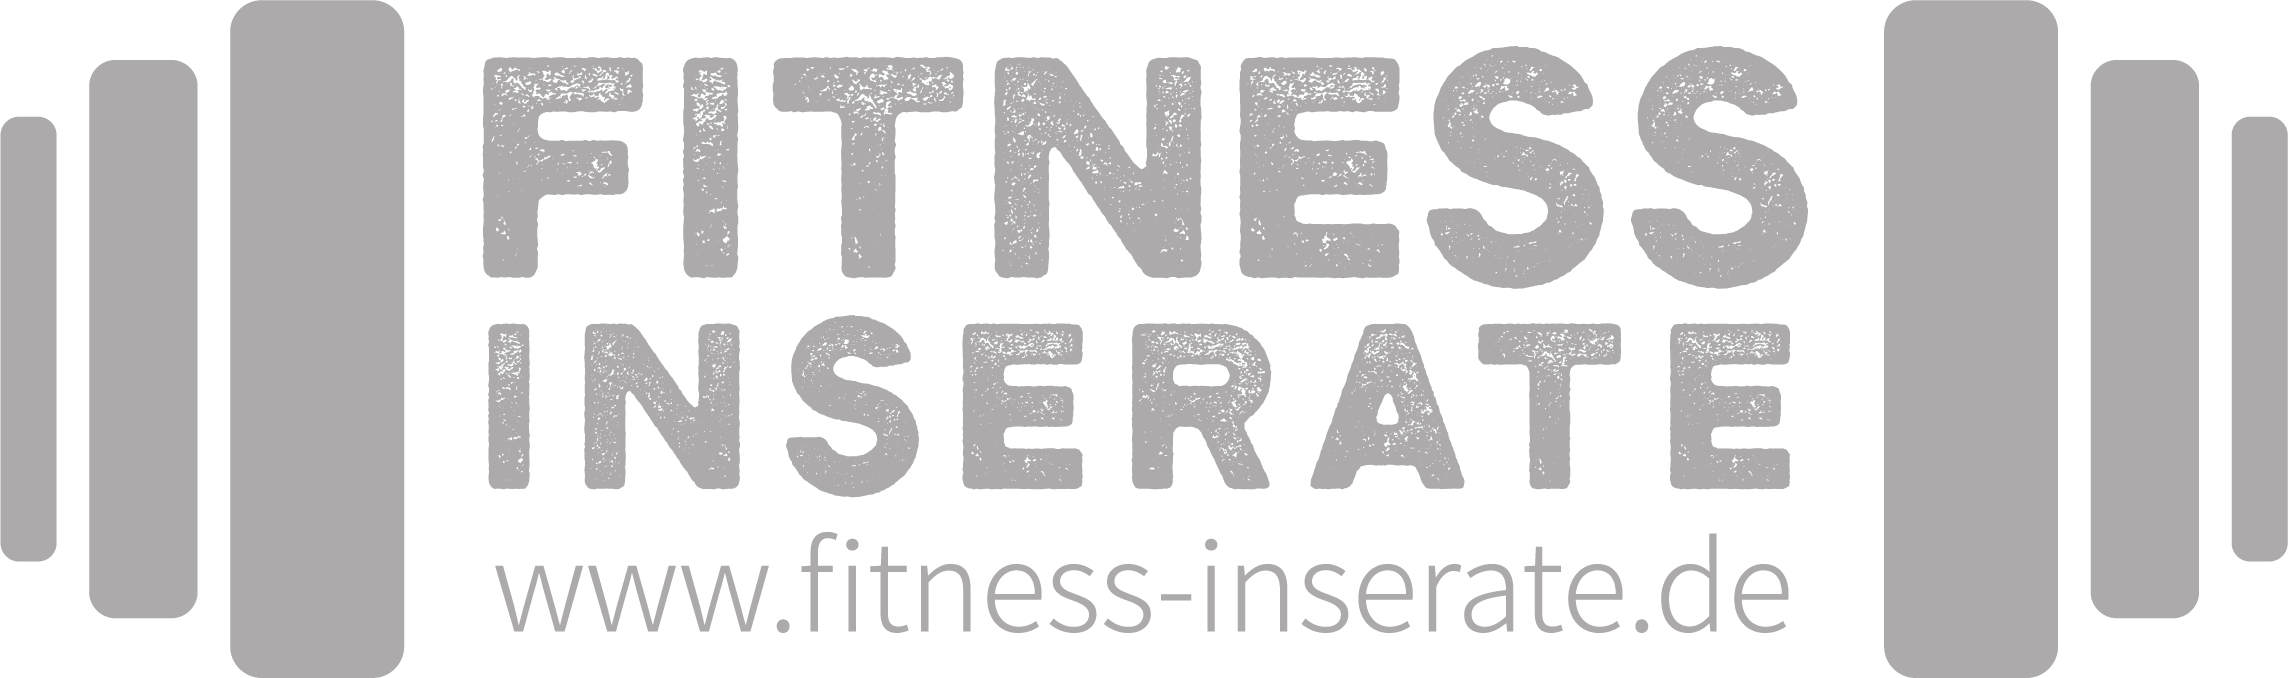 Fitness Inserate logo